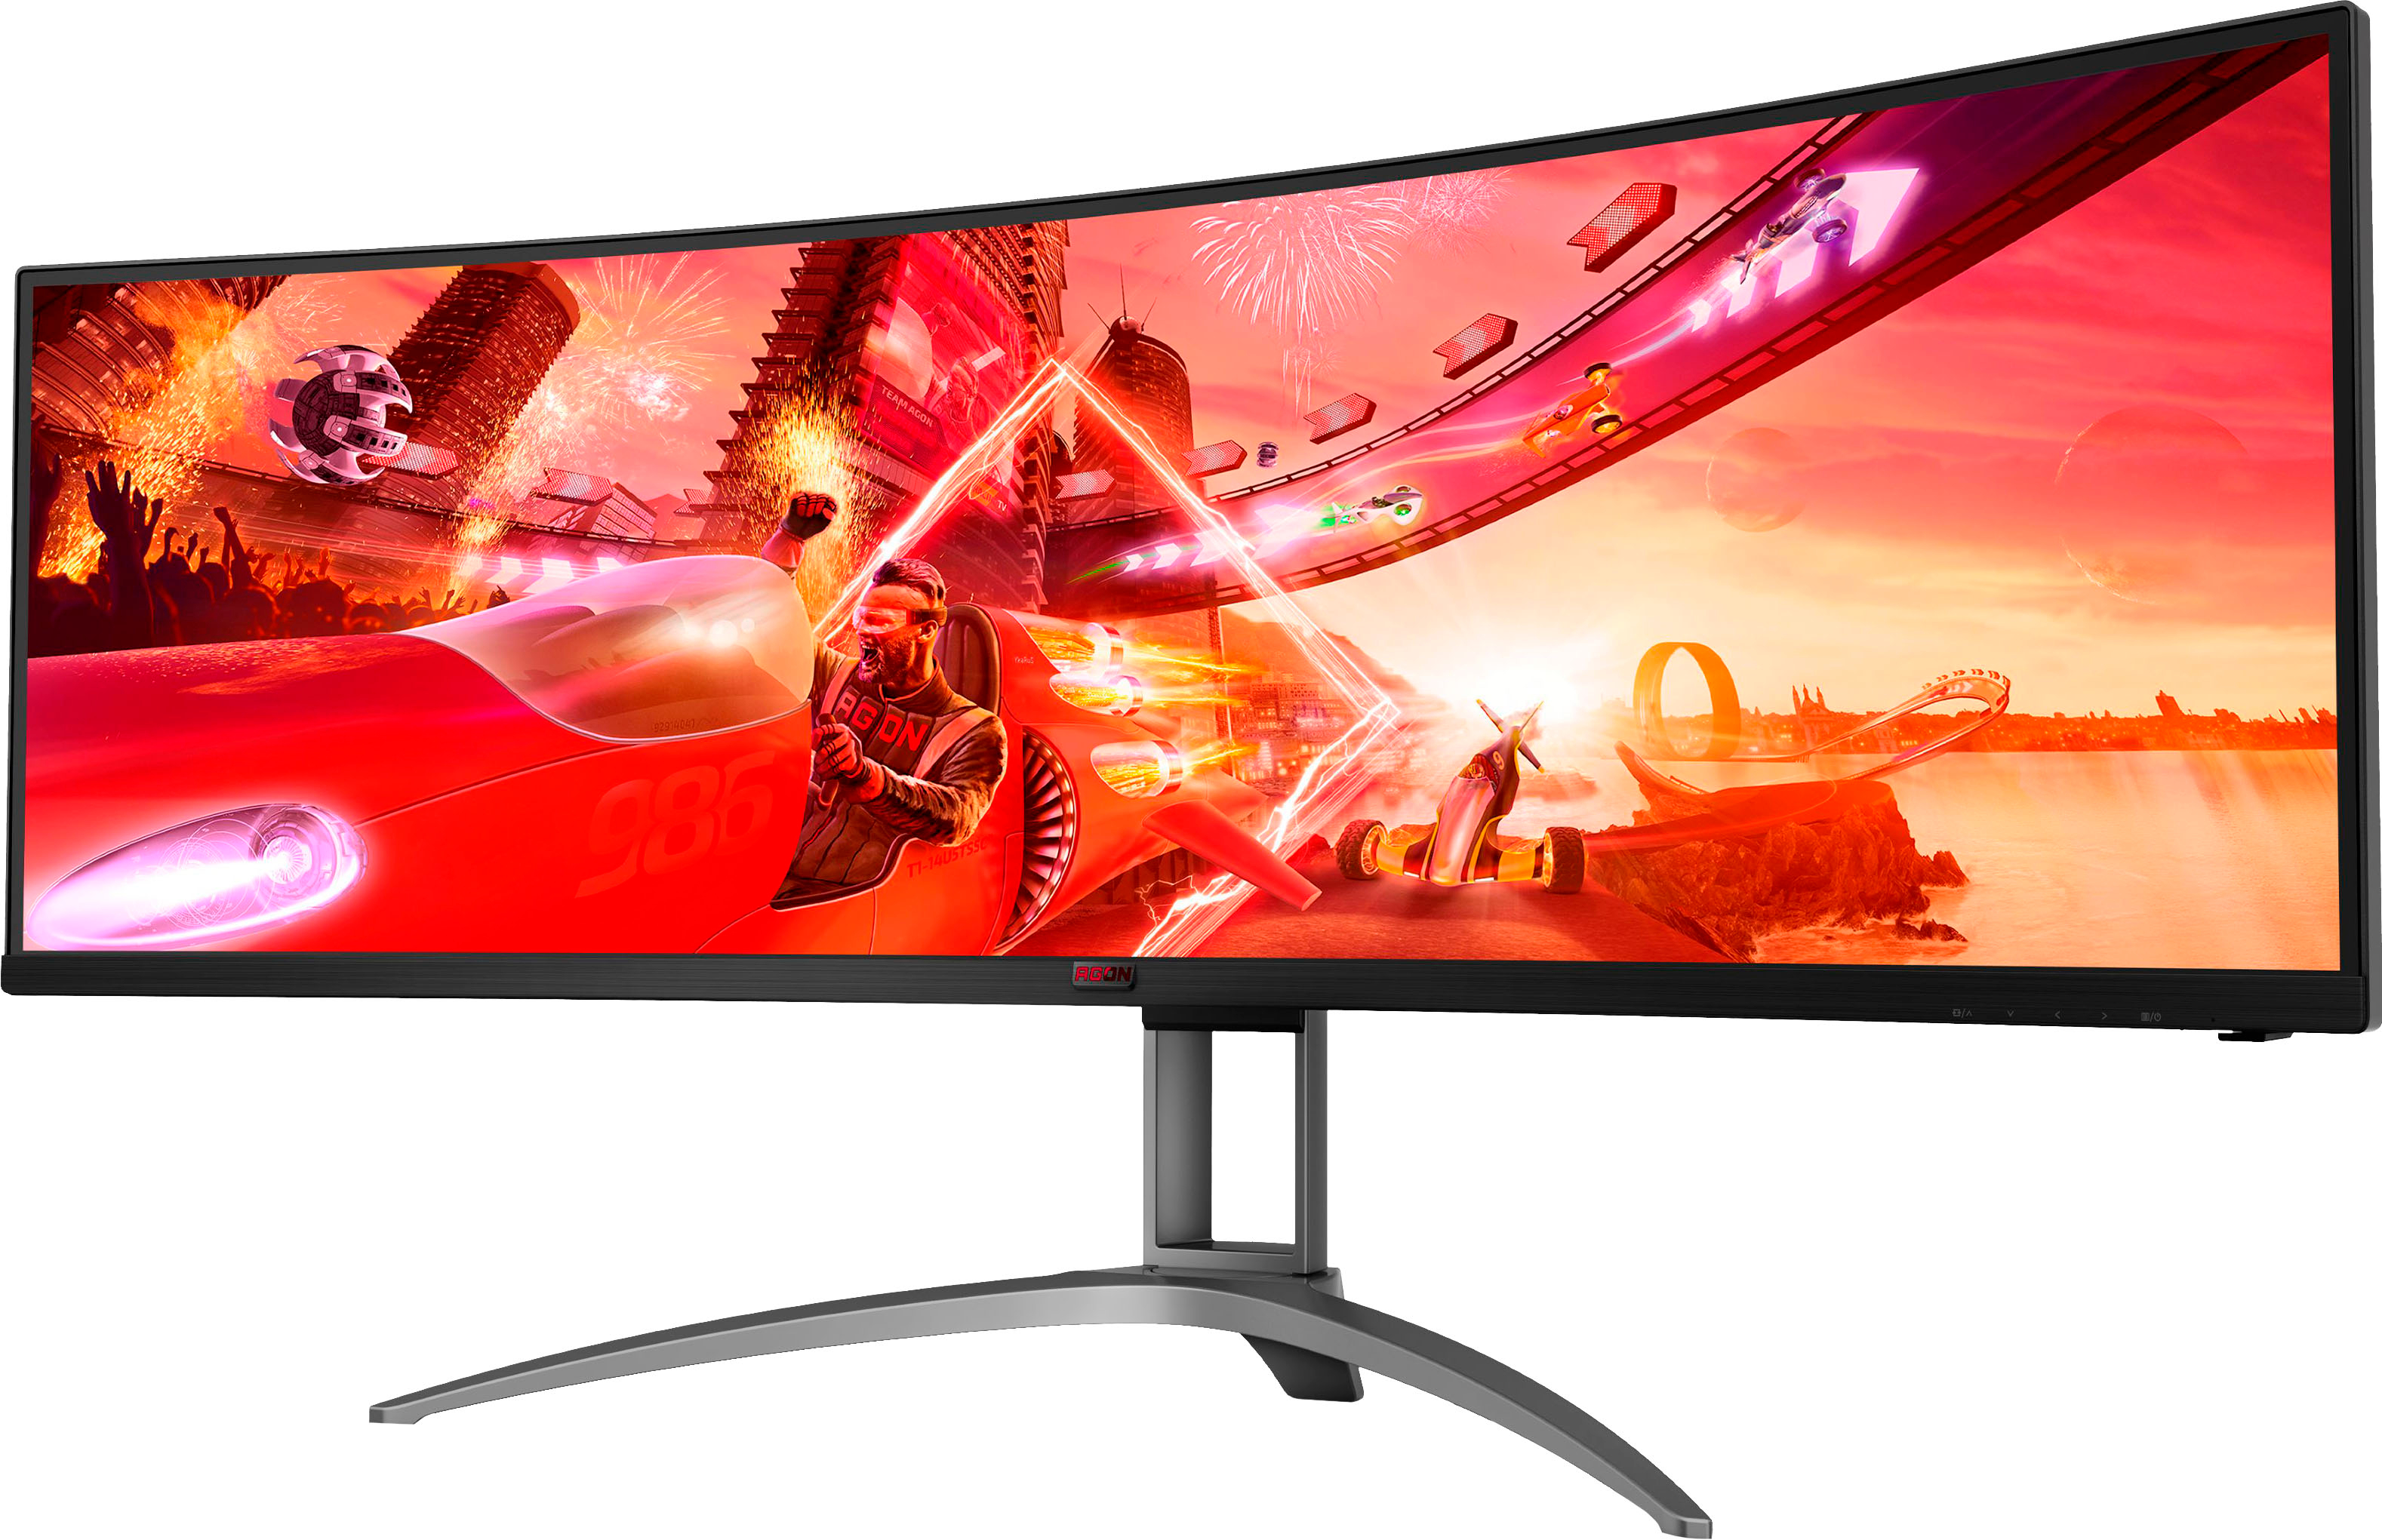 Angle View: AOC - AG493UCX2 49" LCD 4K UWHD Gaming Monitor - Black/Red